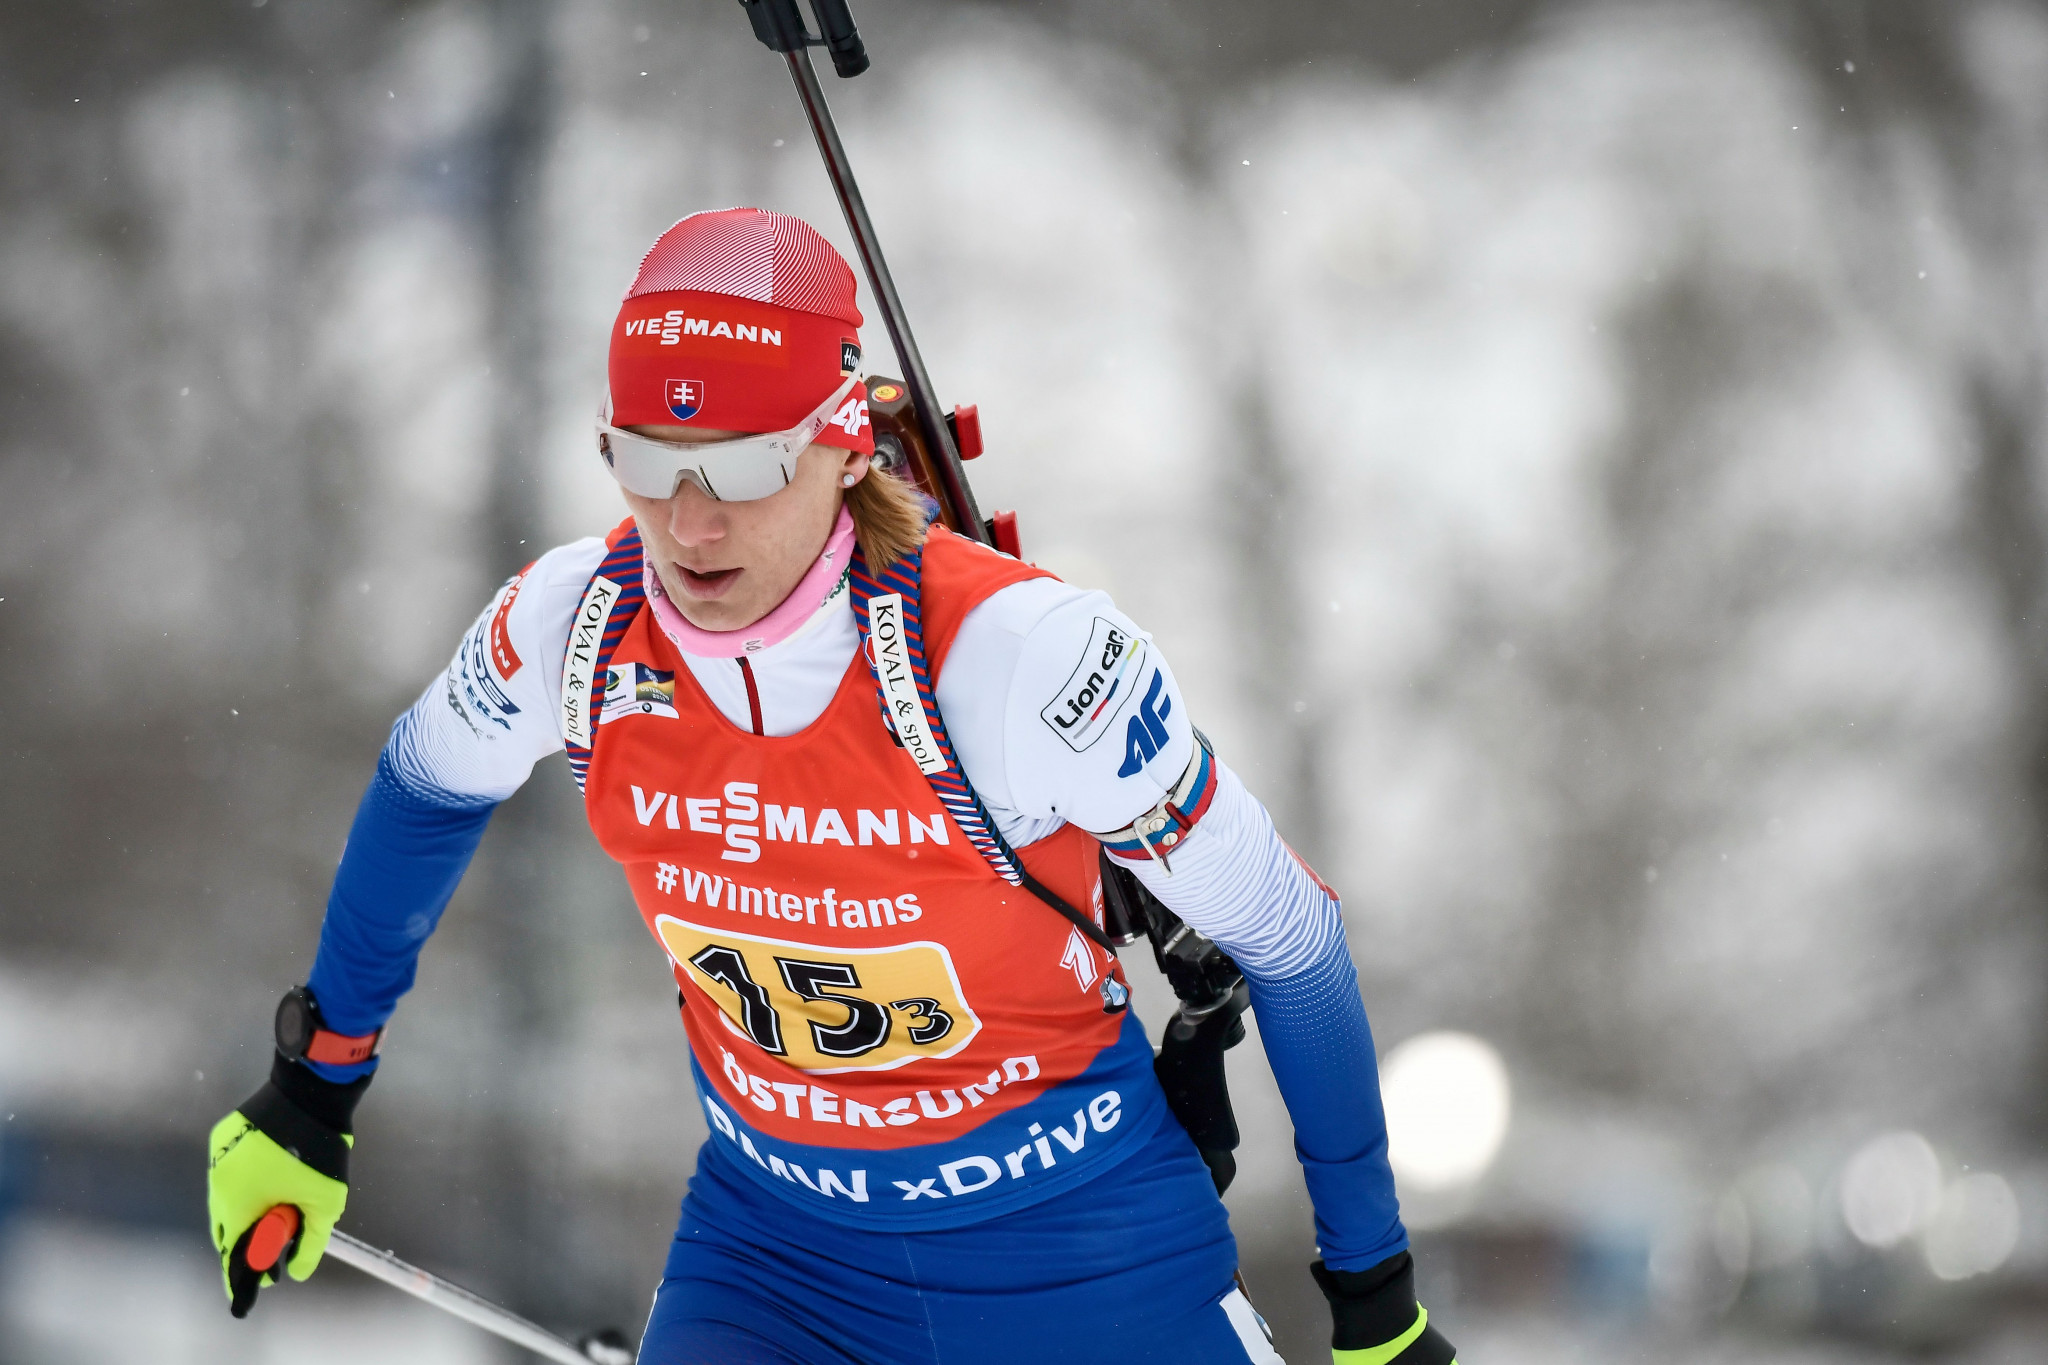 Kuzmina secures overall sprint title at IBU World Cup season finale in Oslo